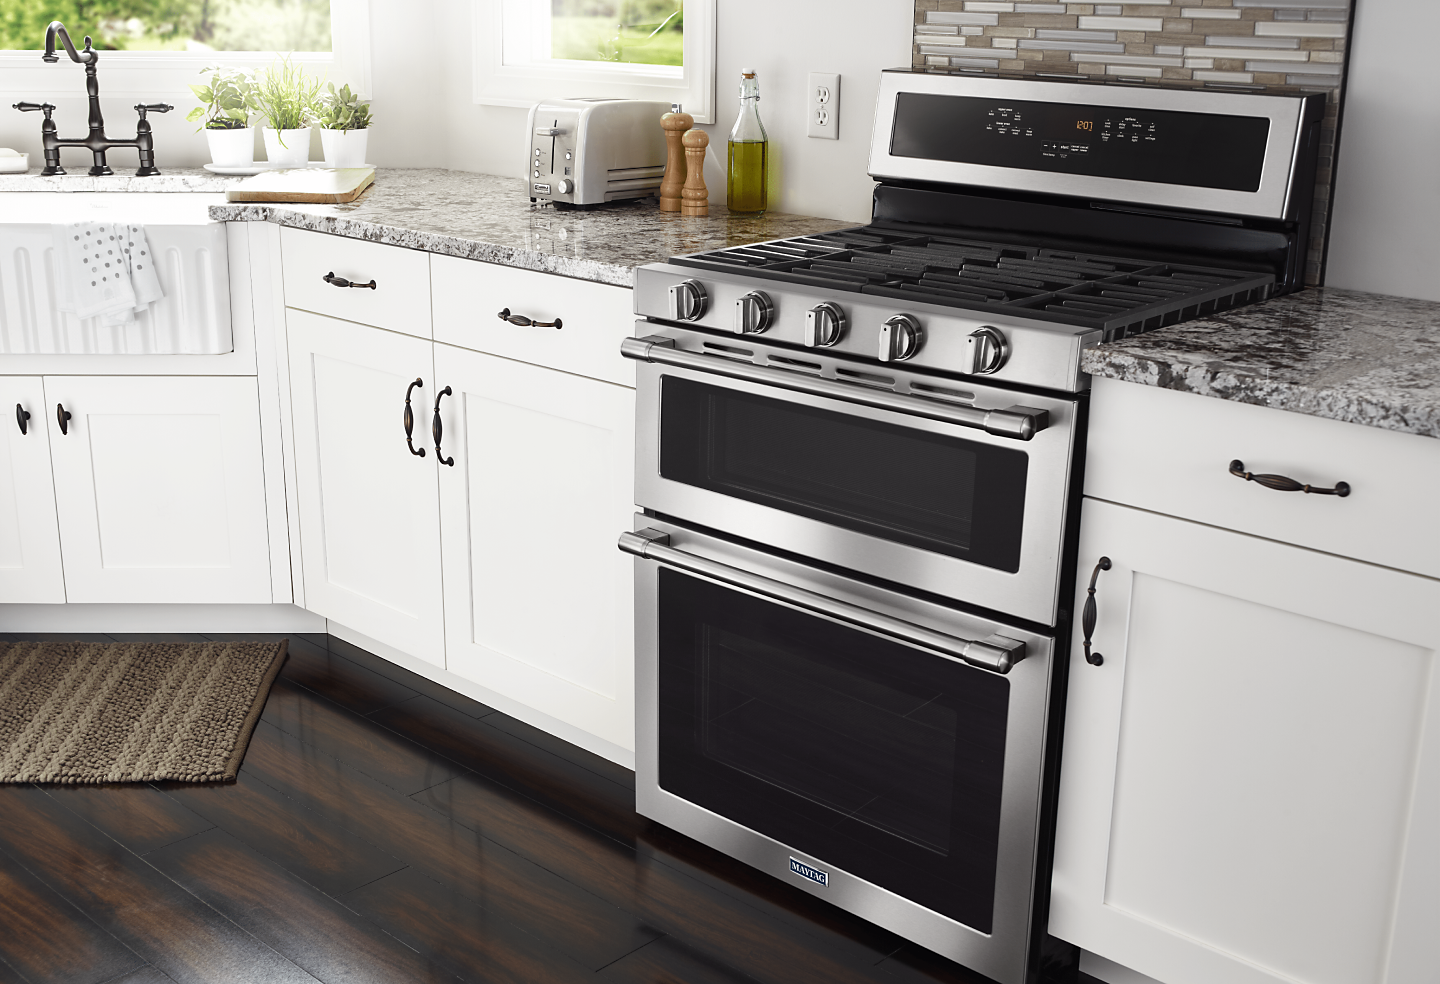 Stainless Maytag® oven and range